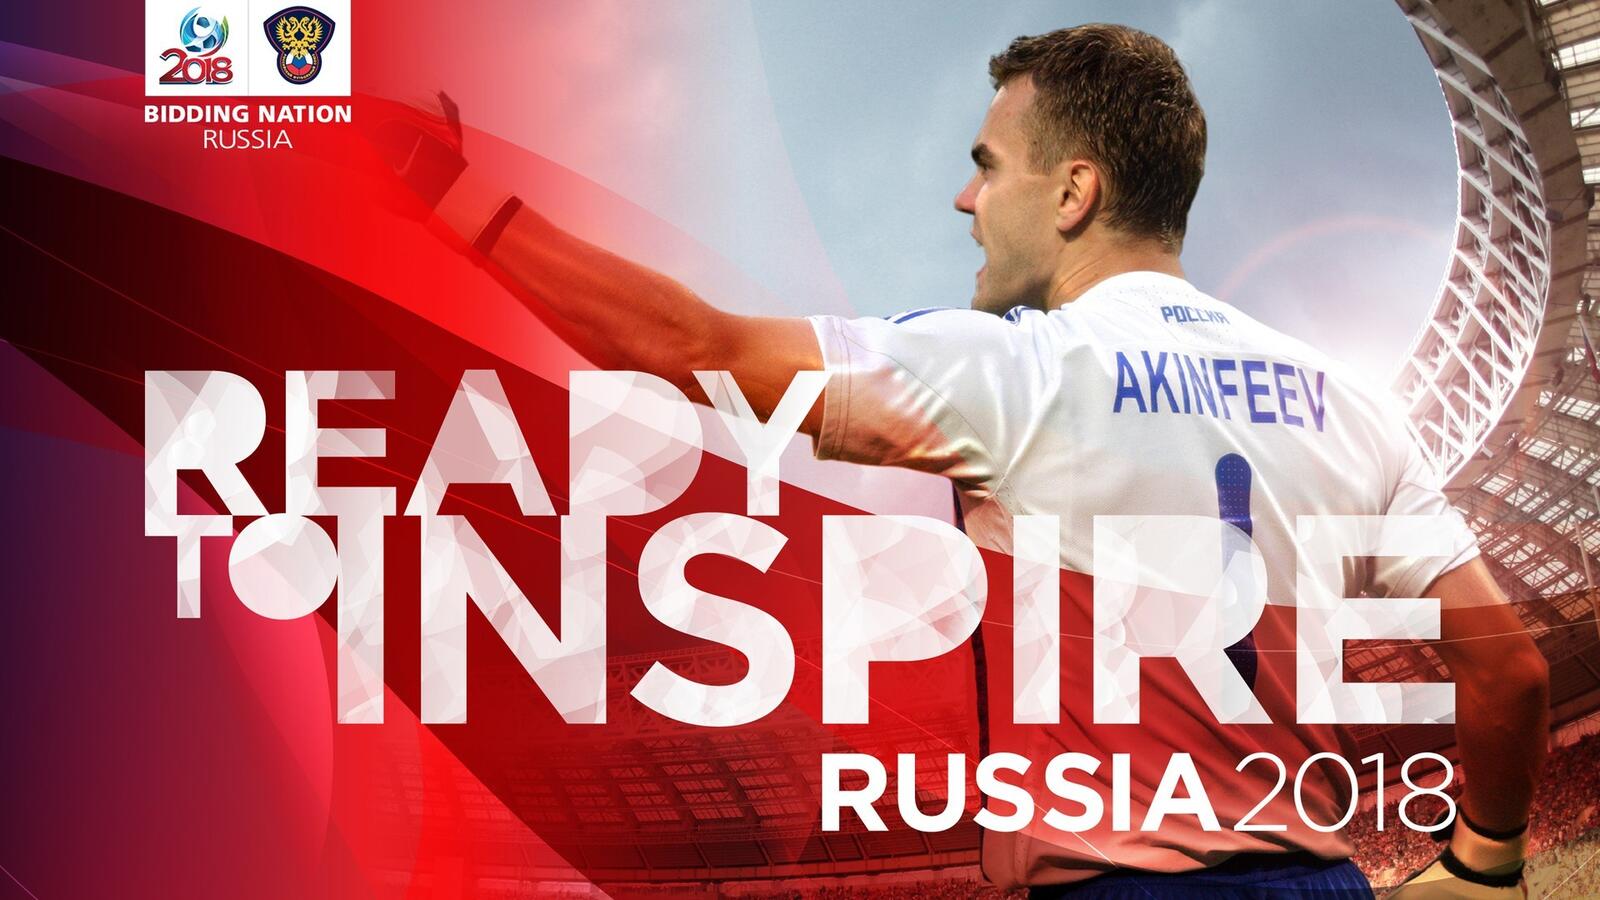 Wallpapers Russian igory akinfeev world soccer championship on the desktop